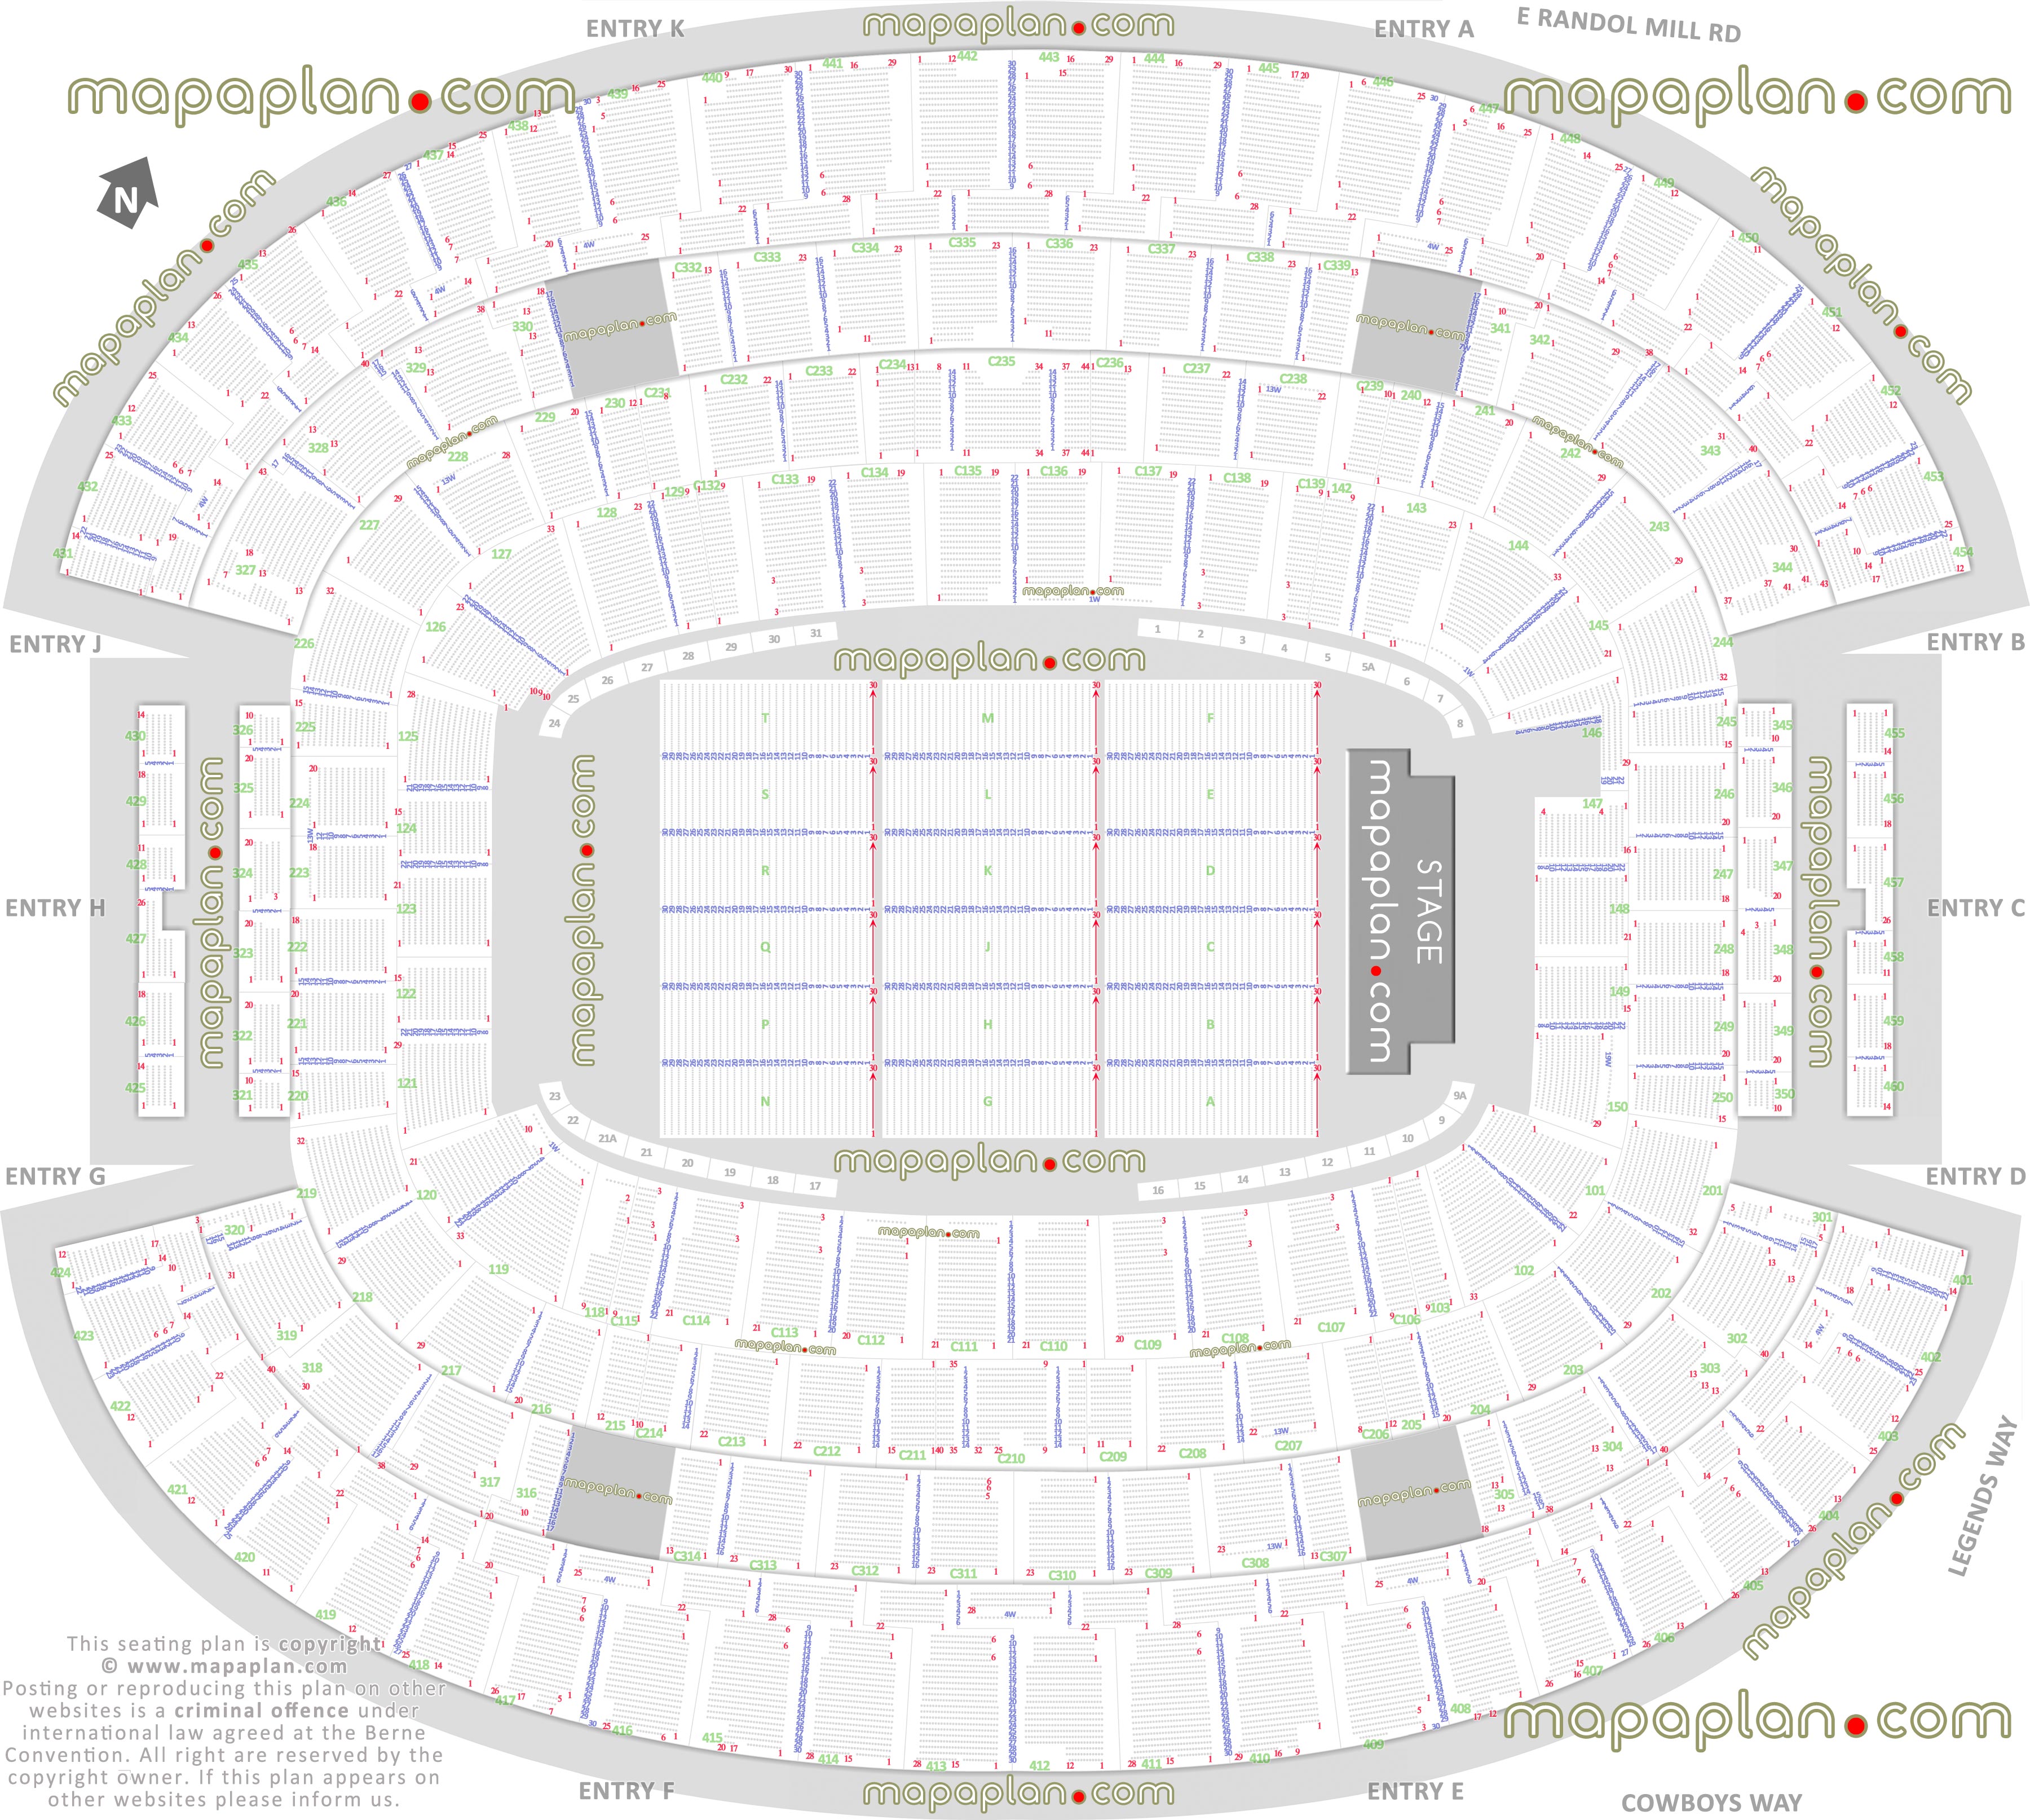 detailed seat row numbers end stage concert sections floor plan map virtual 3d interactive layout Dallas Cowboys ATT Stadium seating chart